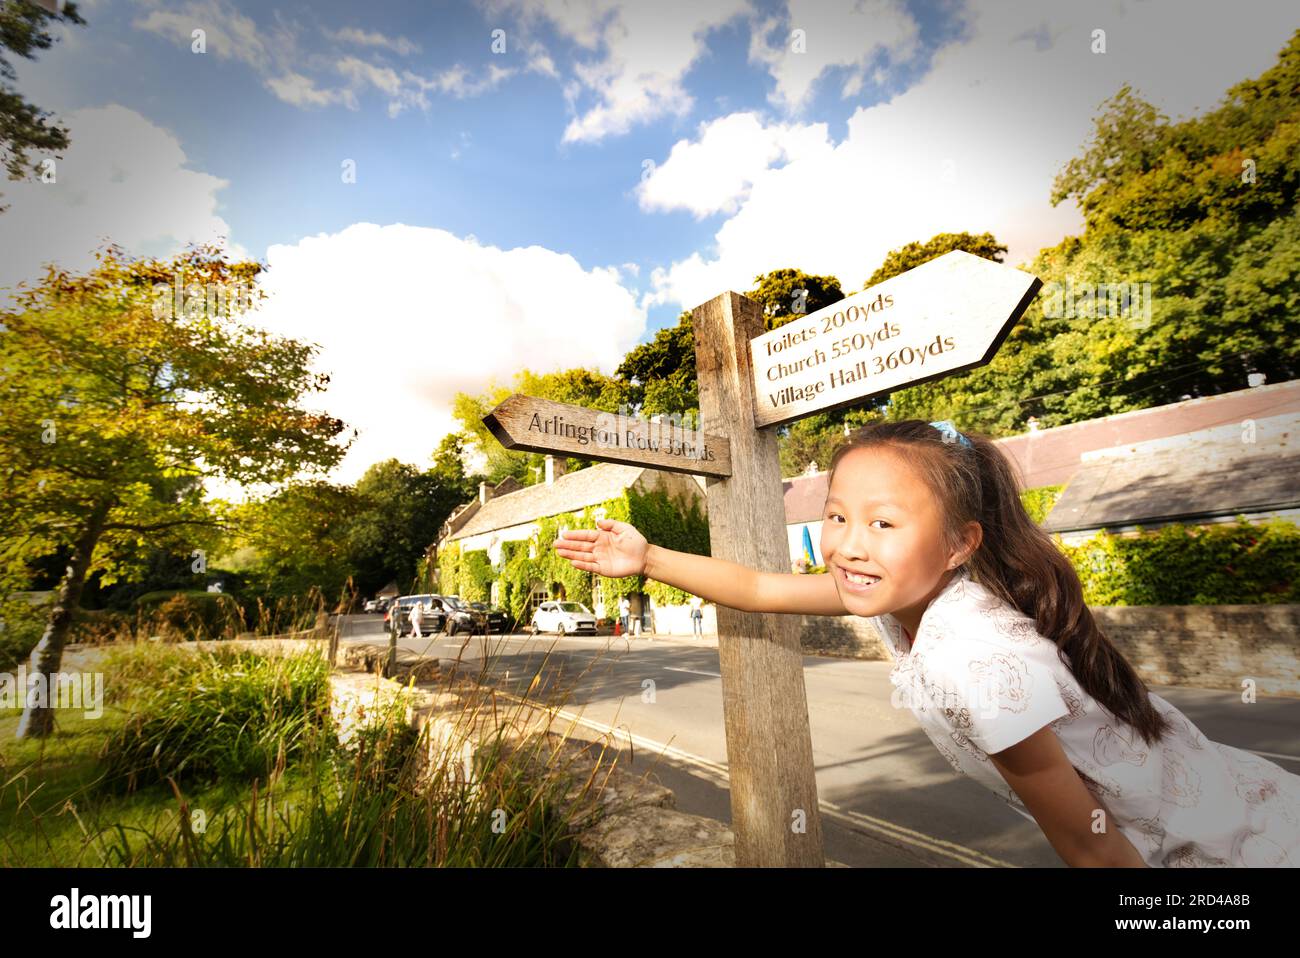 Arlington Row in Bibury, Cotswolds, road sign to famous Arlington Row, a girl pointing to the road sign, travel excitement Stock Photo